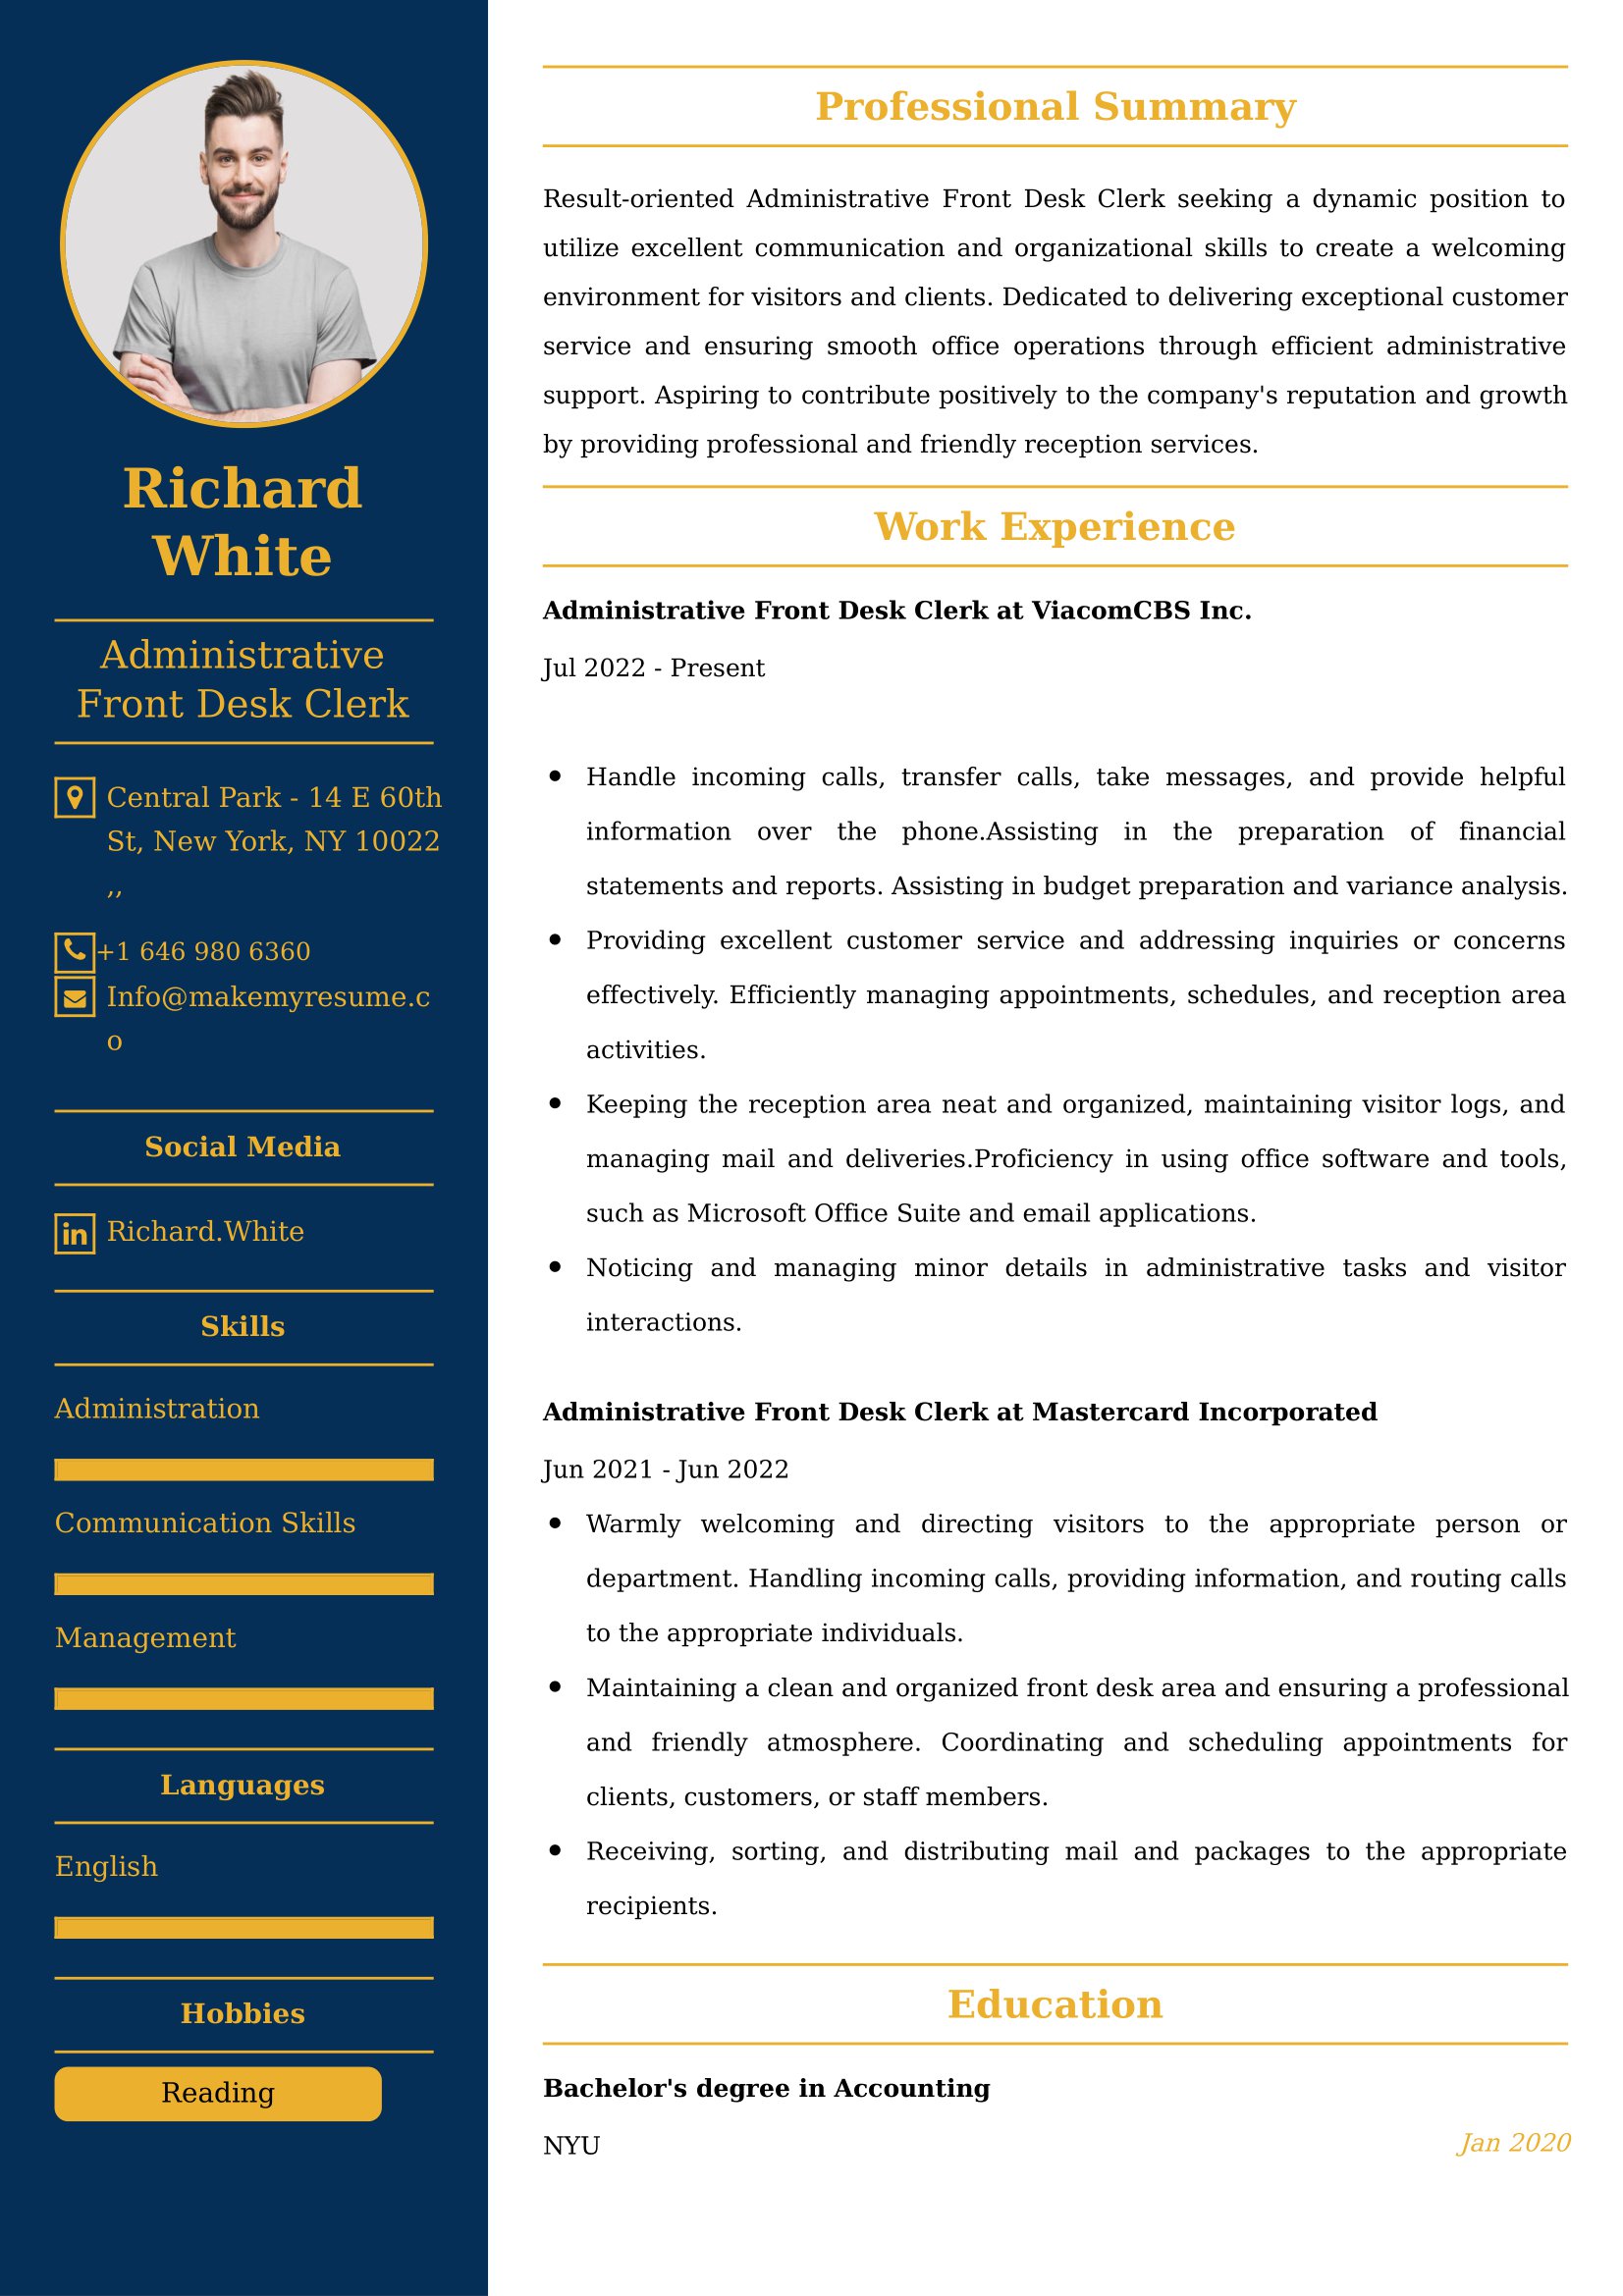 Administrative Front Desk Clerk Resume Examples - Australian Format and Tips